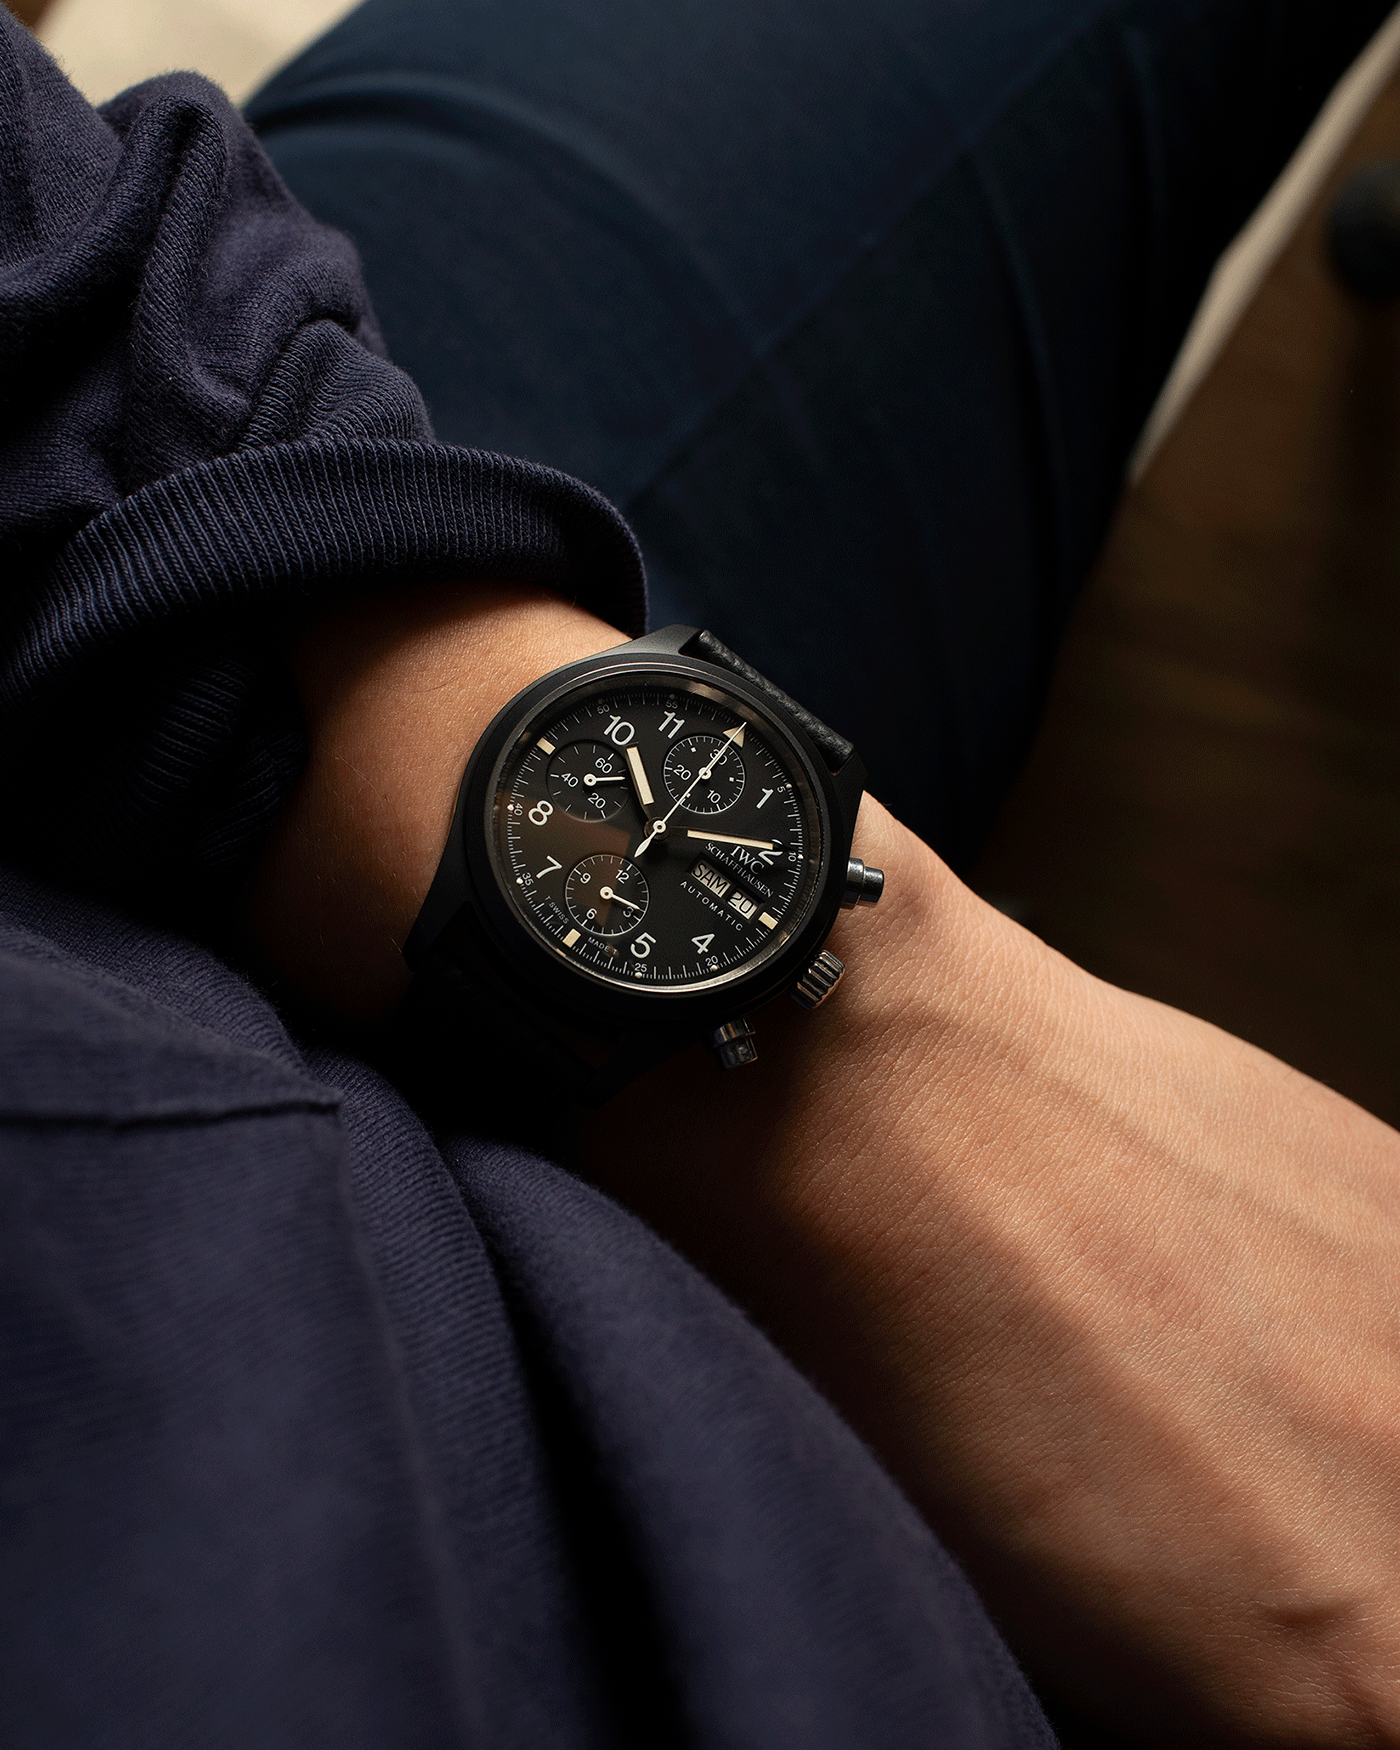 Brand: IWC Year: 1990s Model: Ceramic Fliegerchronograph Reference Number: 3705 Material: Ceramic and Stainless Steel Movement: Valjoux cal. 7750 Case Diameter: 39mm Bracelet/Strap: Molequin Anthracite Grained Calf with Stainless Steel IWC Tang Buckle